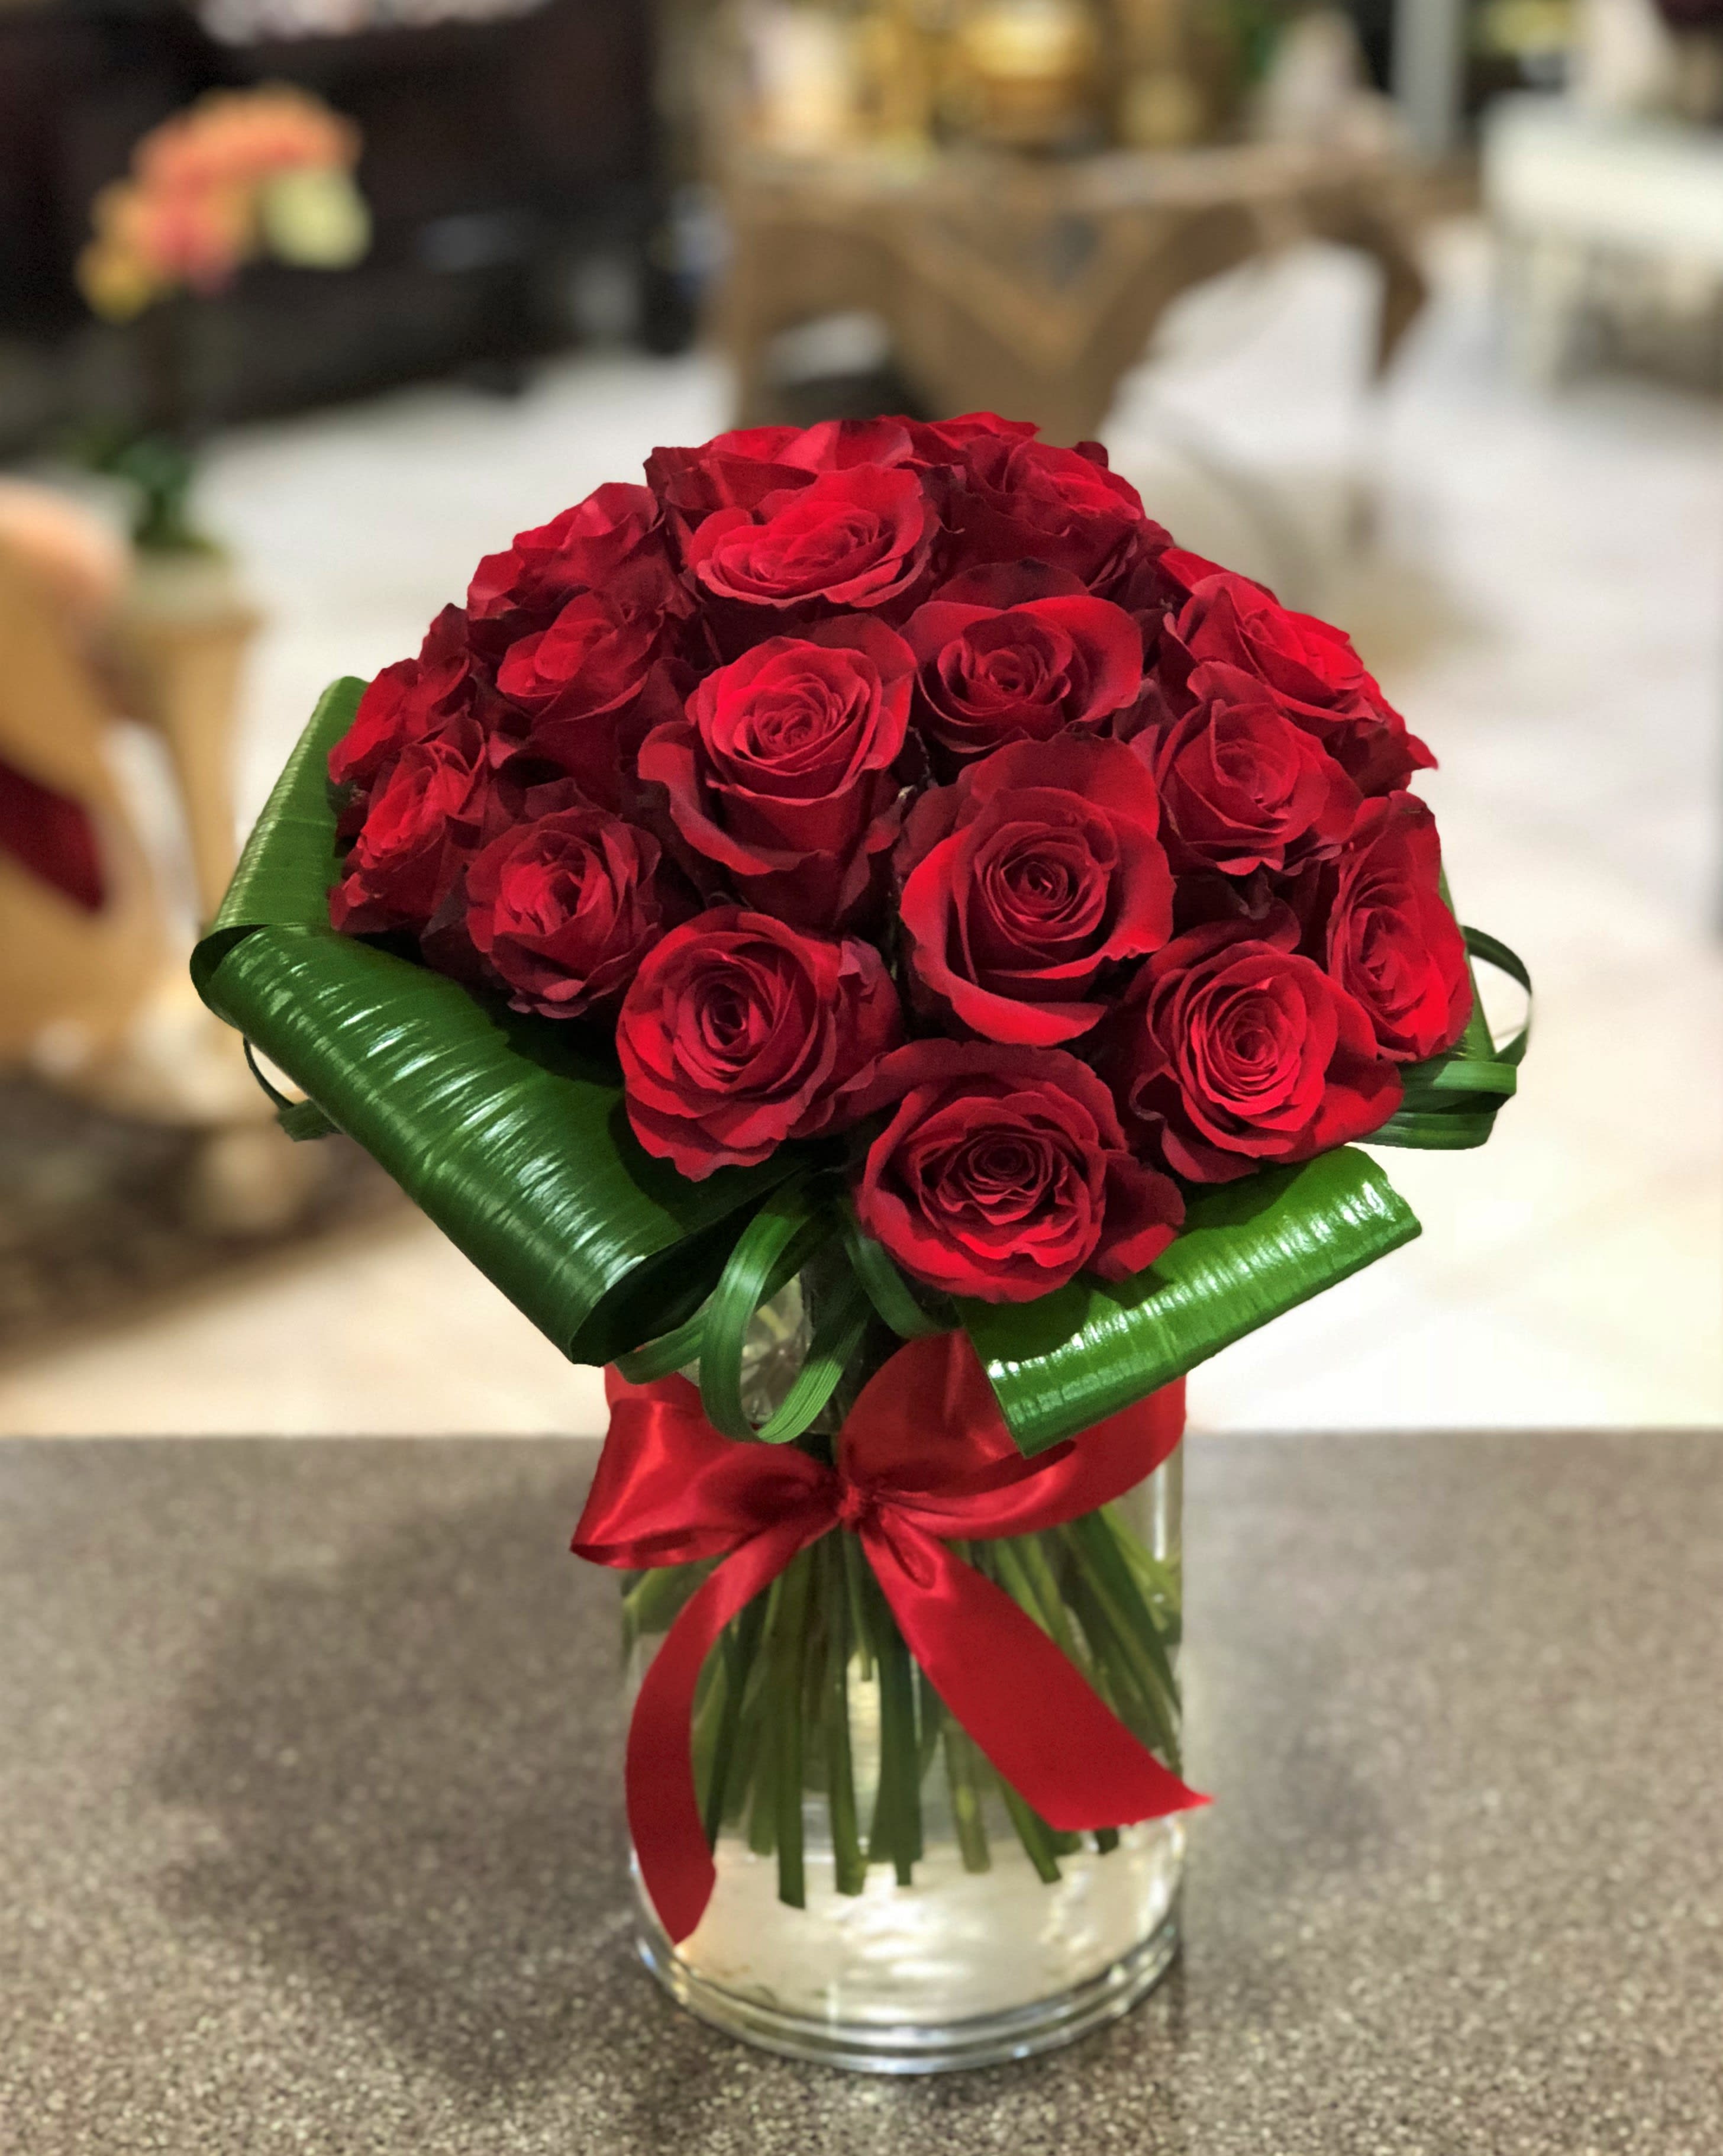 Passion - Take her breath away with 18 of our premium red roses in a cluster style arrangement.  Also available in other colors based on availability.